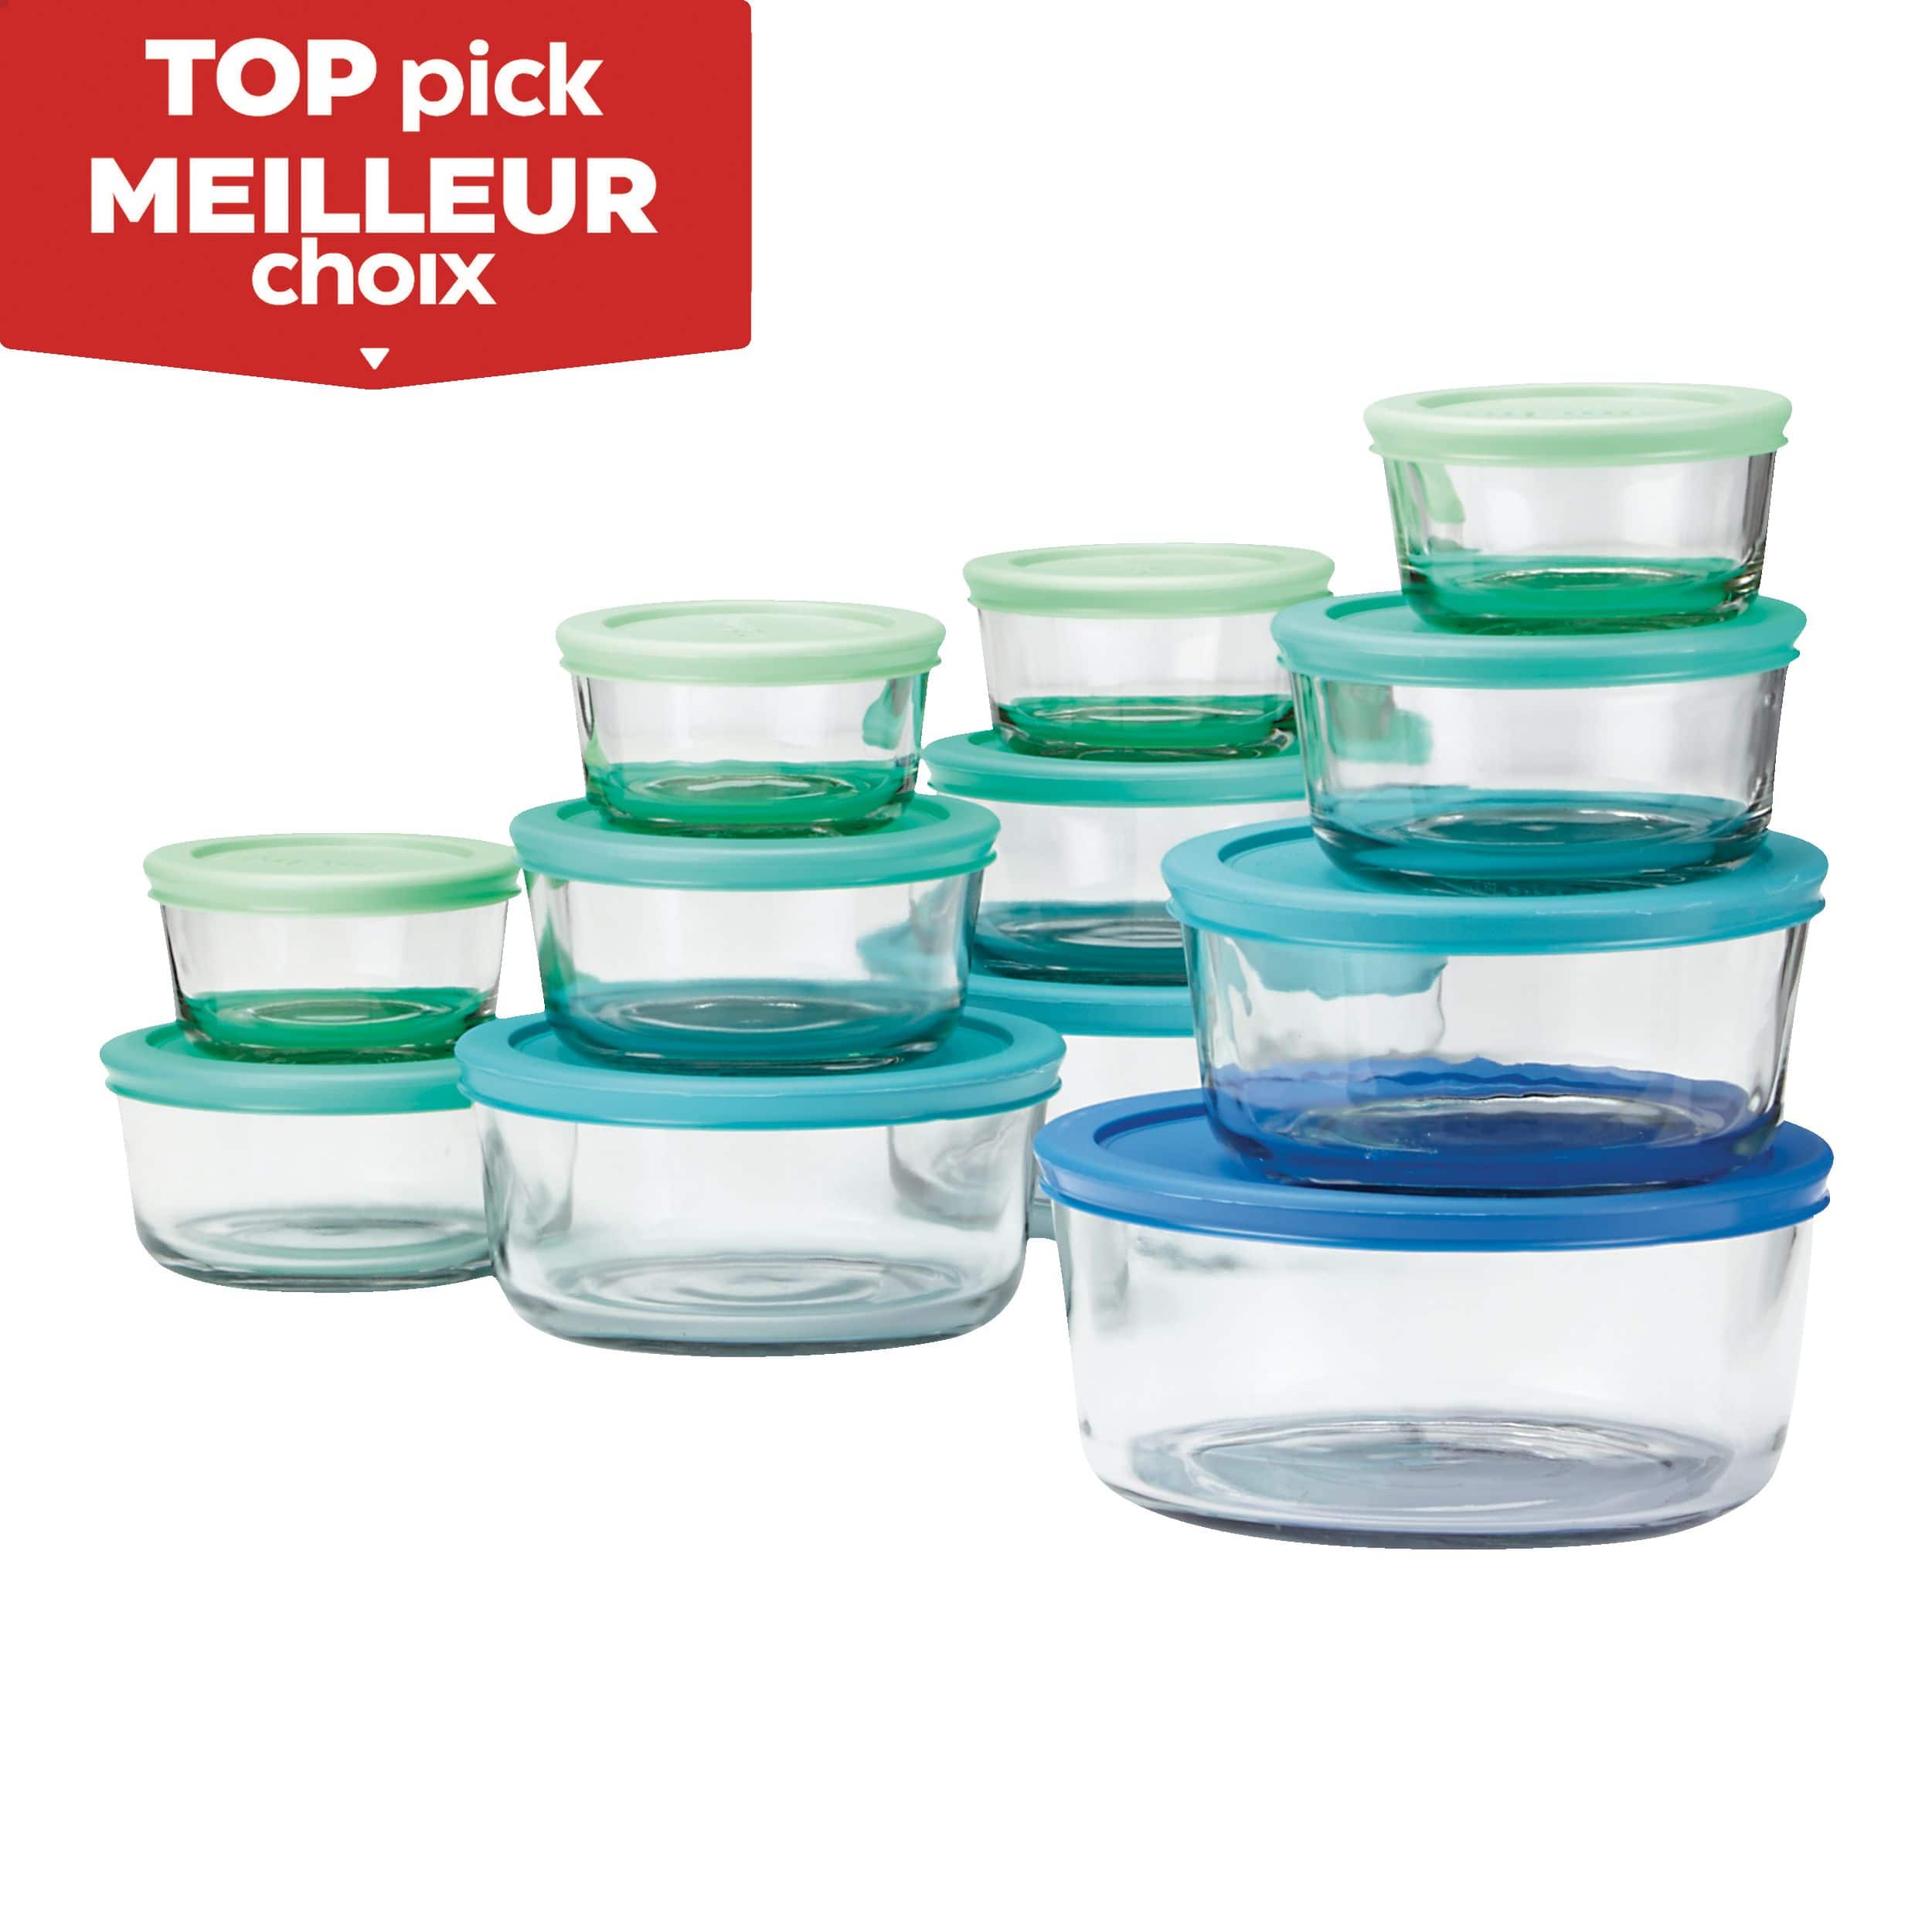 Anchor Hocking 20-Pc. Food Storage Set with Multi-color Lids